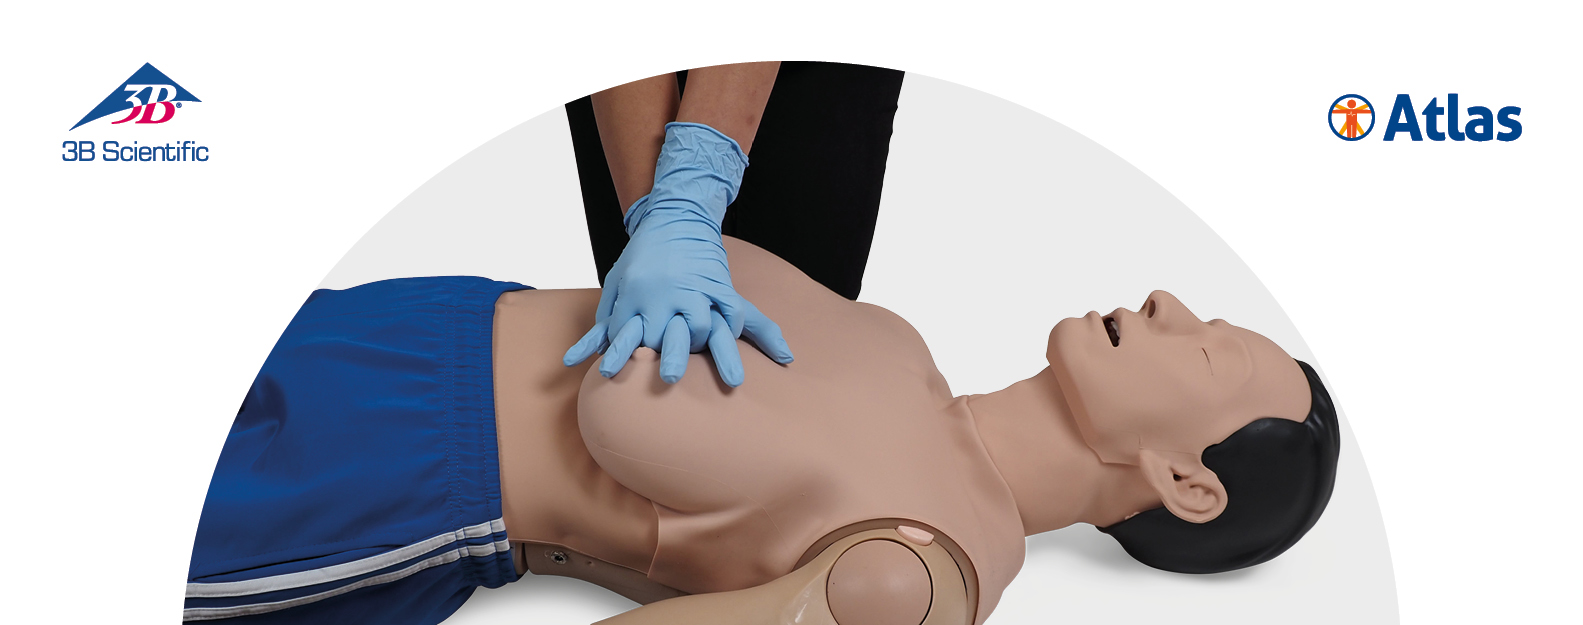 Empowering Lifesavers: The Atlas Female Chest is transforming CPR training for women